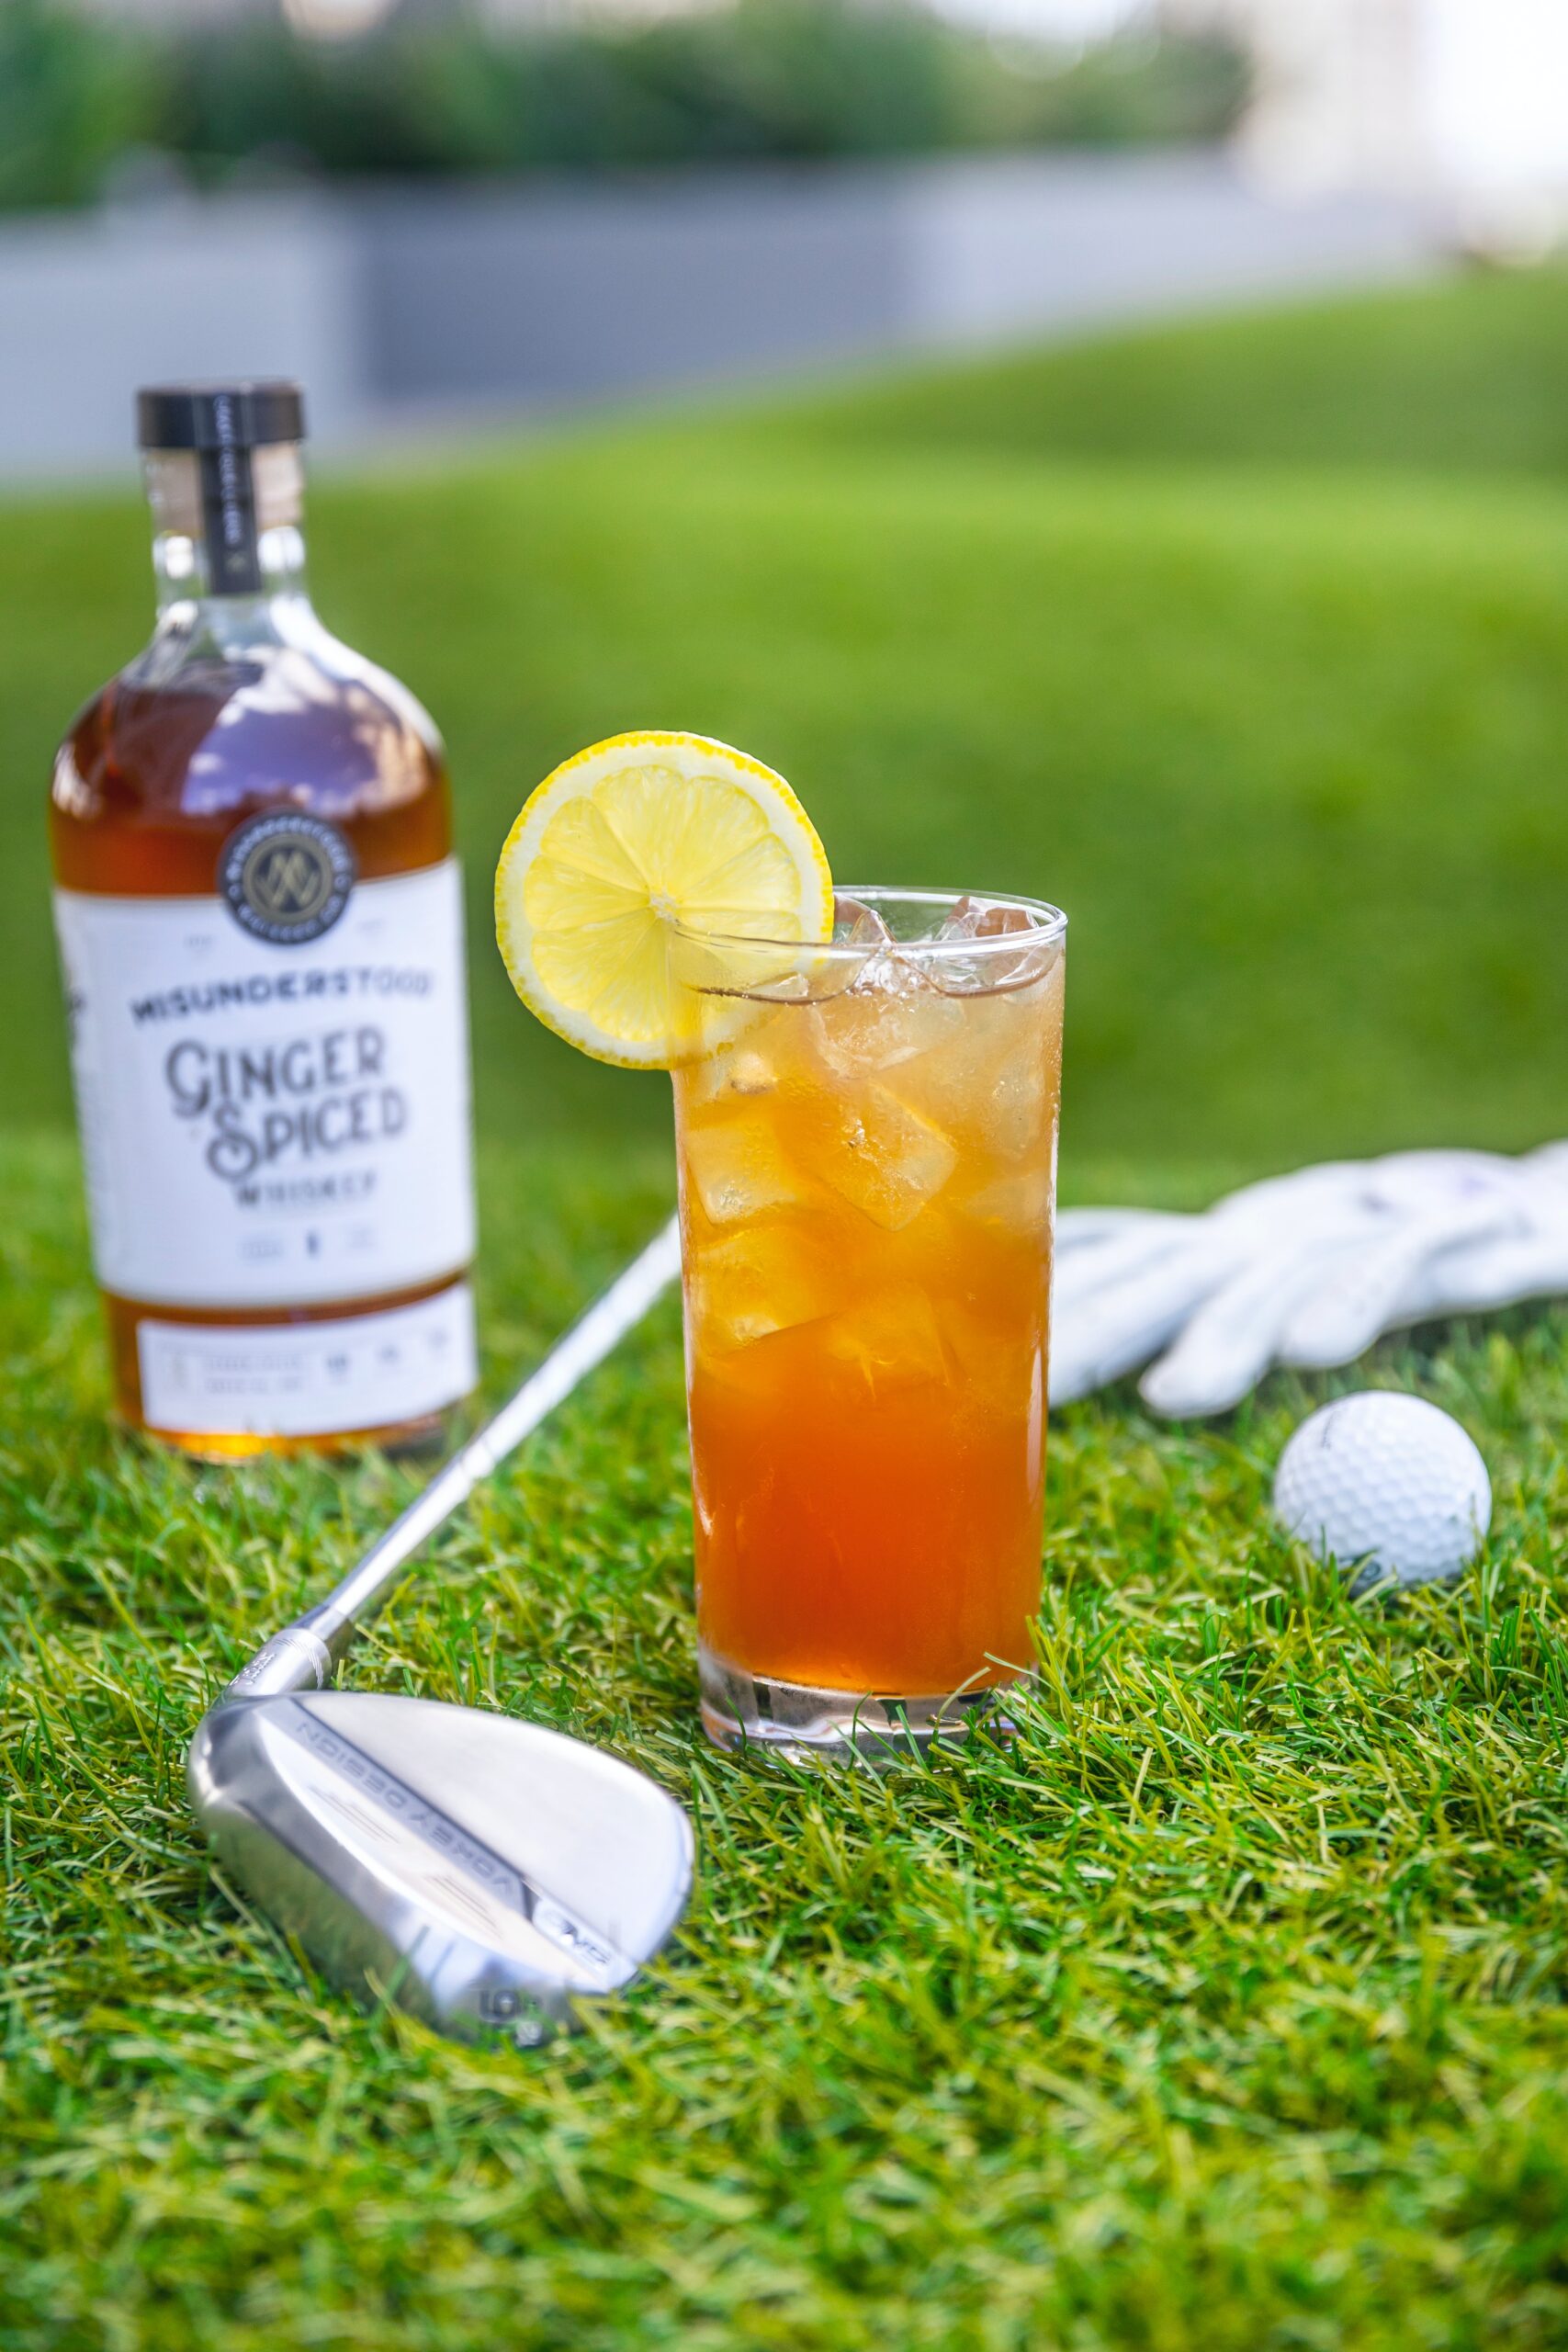 Cocktail resting on a bed of grass with a golf club and balls in the background